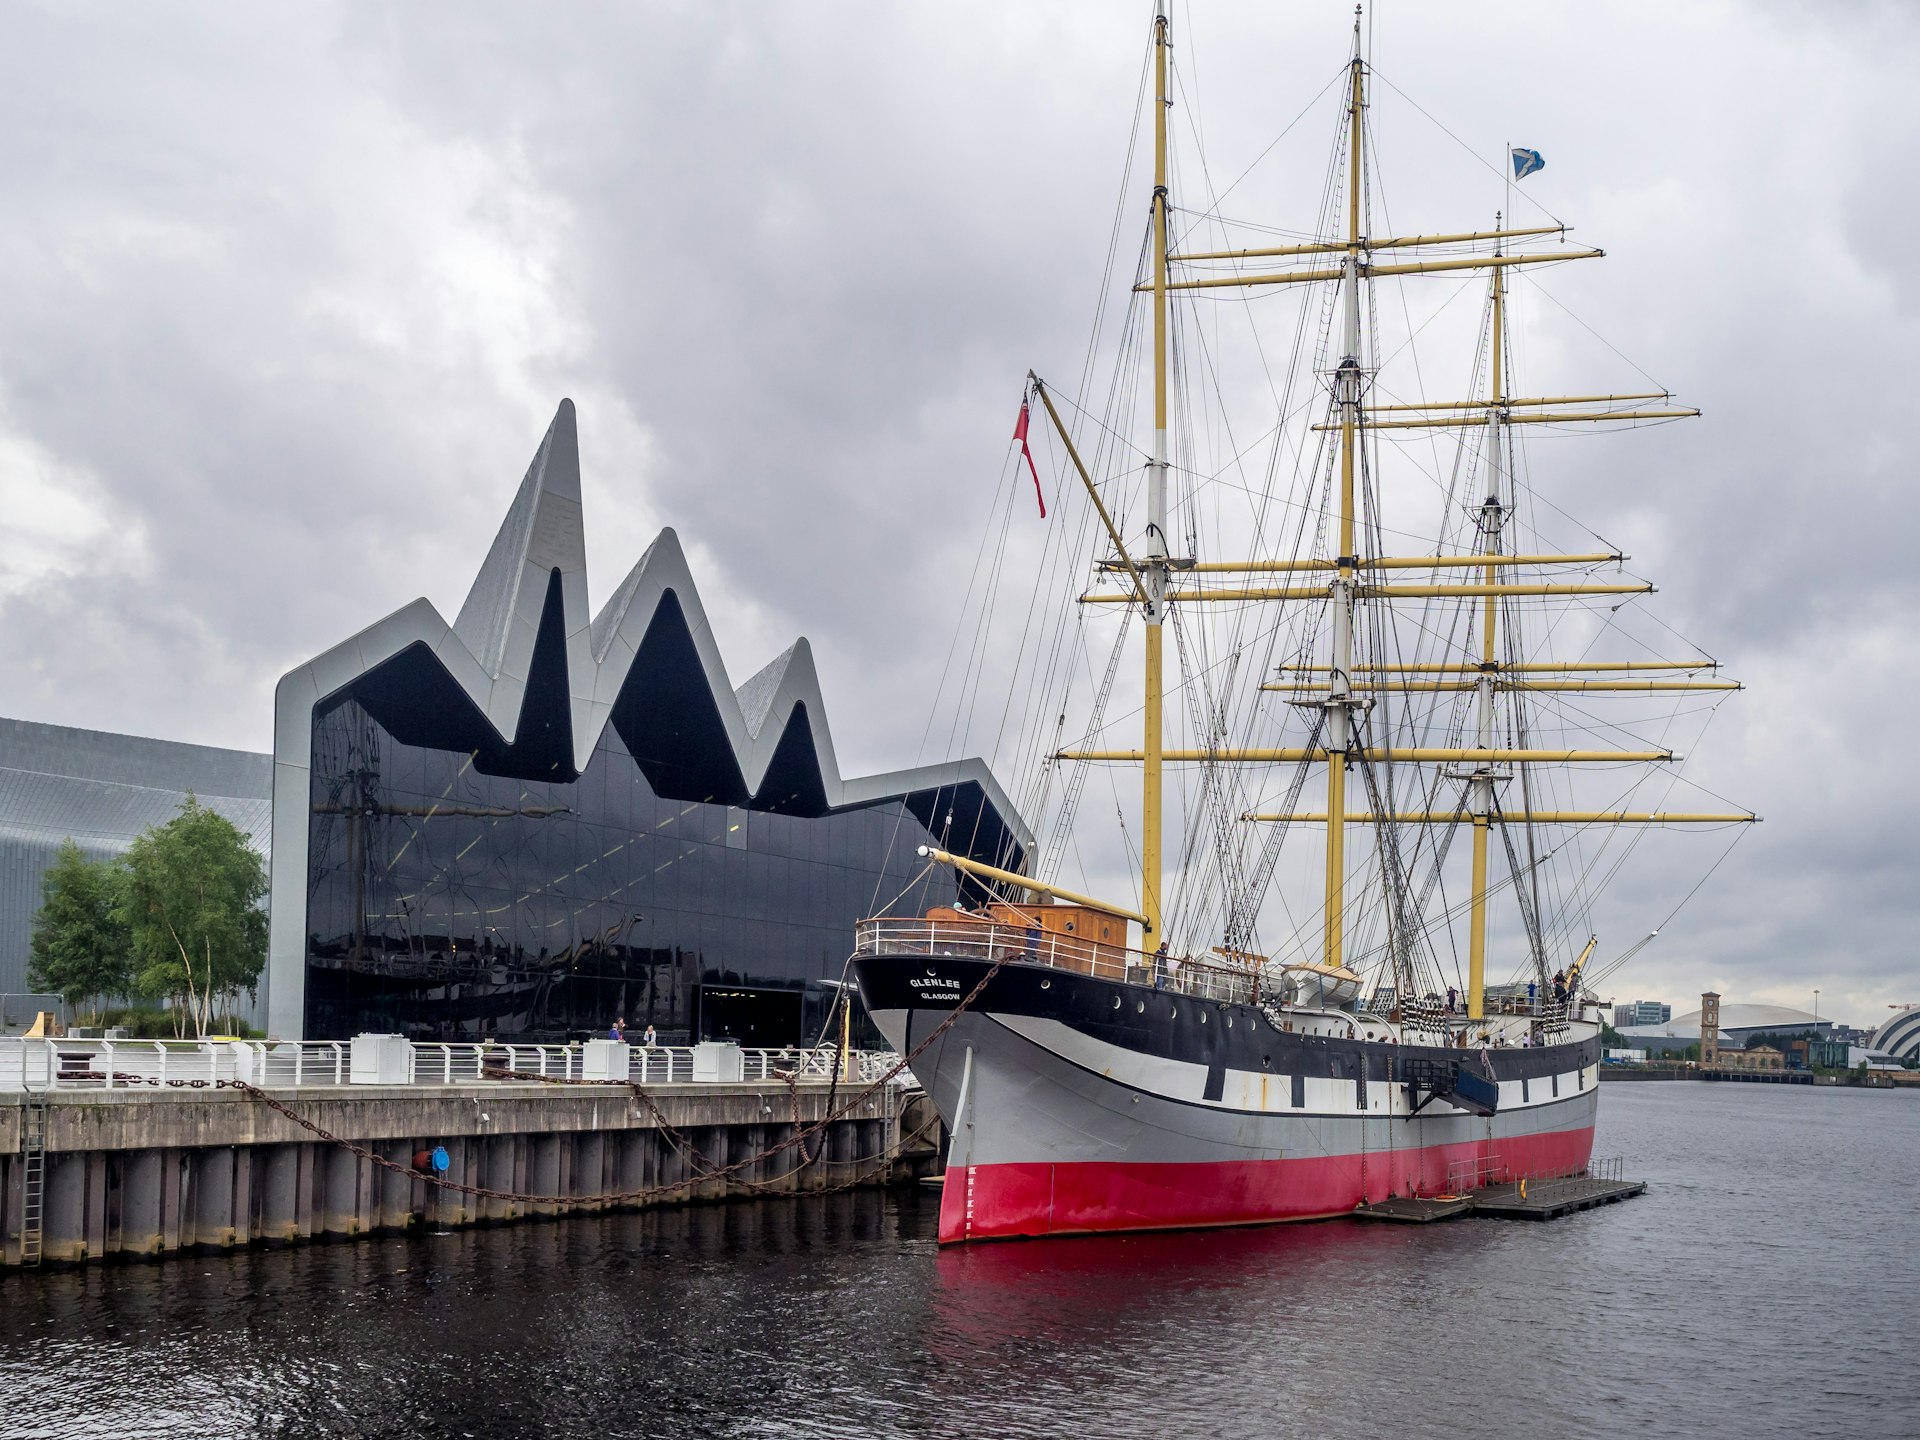 A three-masted, rud-hulled ship Glenlee moored in the Kelvin River by the Riverside Museum Glasgow